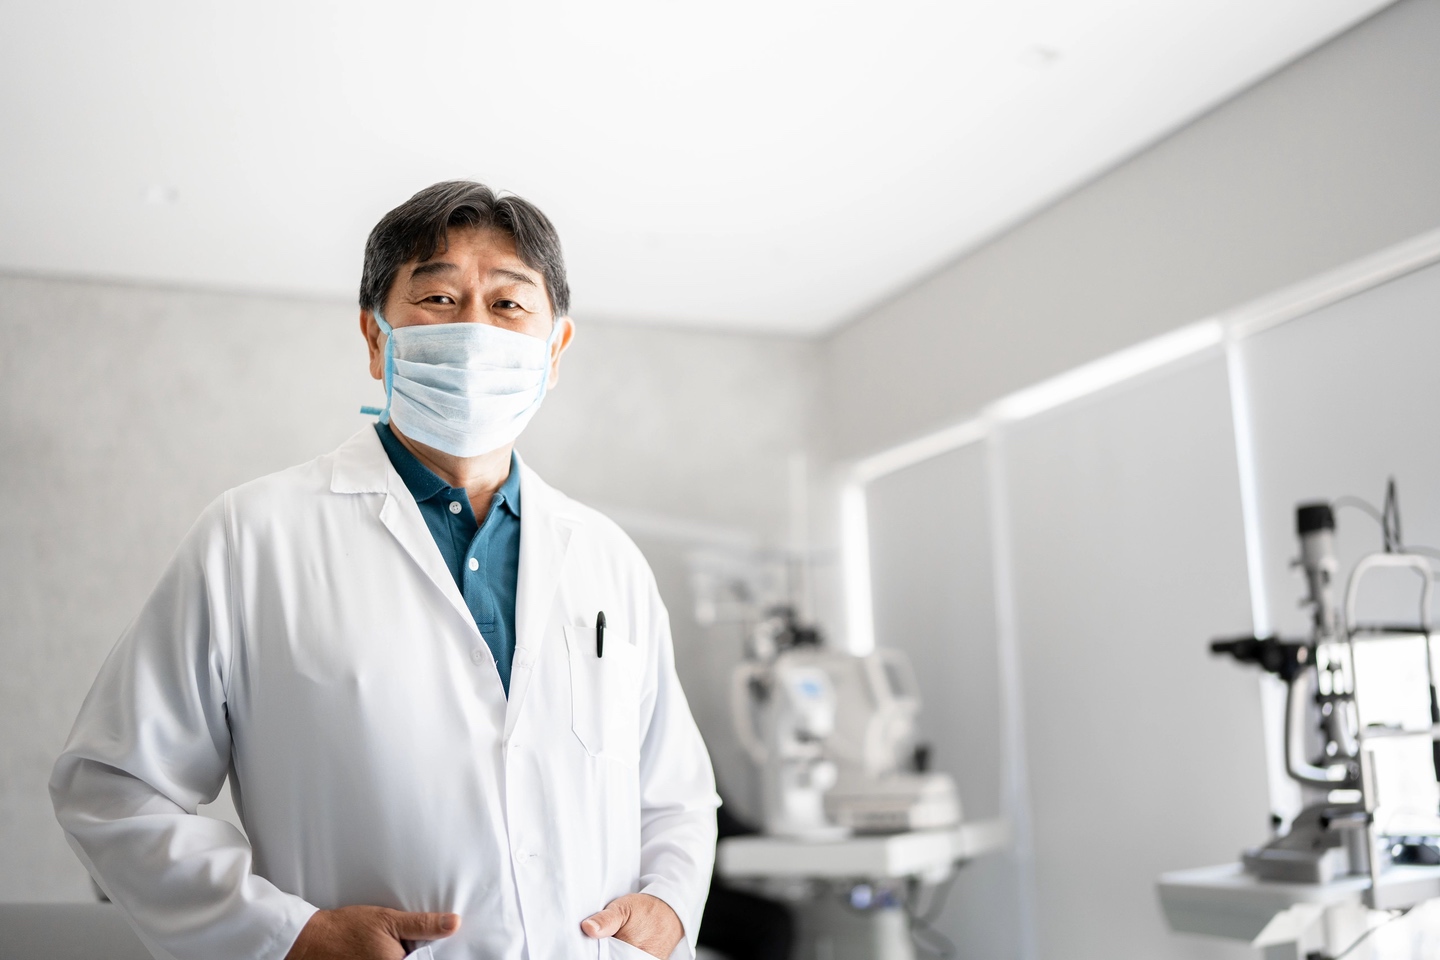 Medical professional in lab coat and mask, standing in room with eye examination equipment